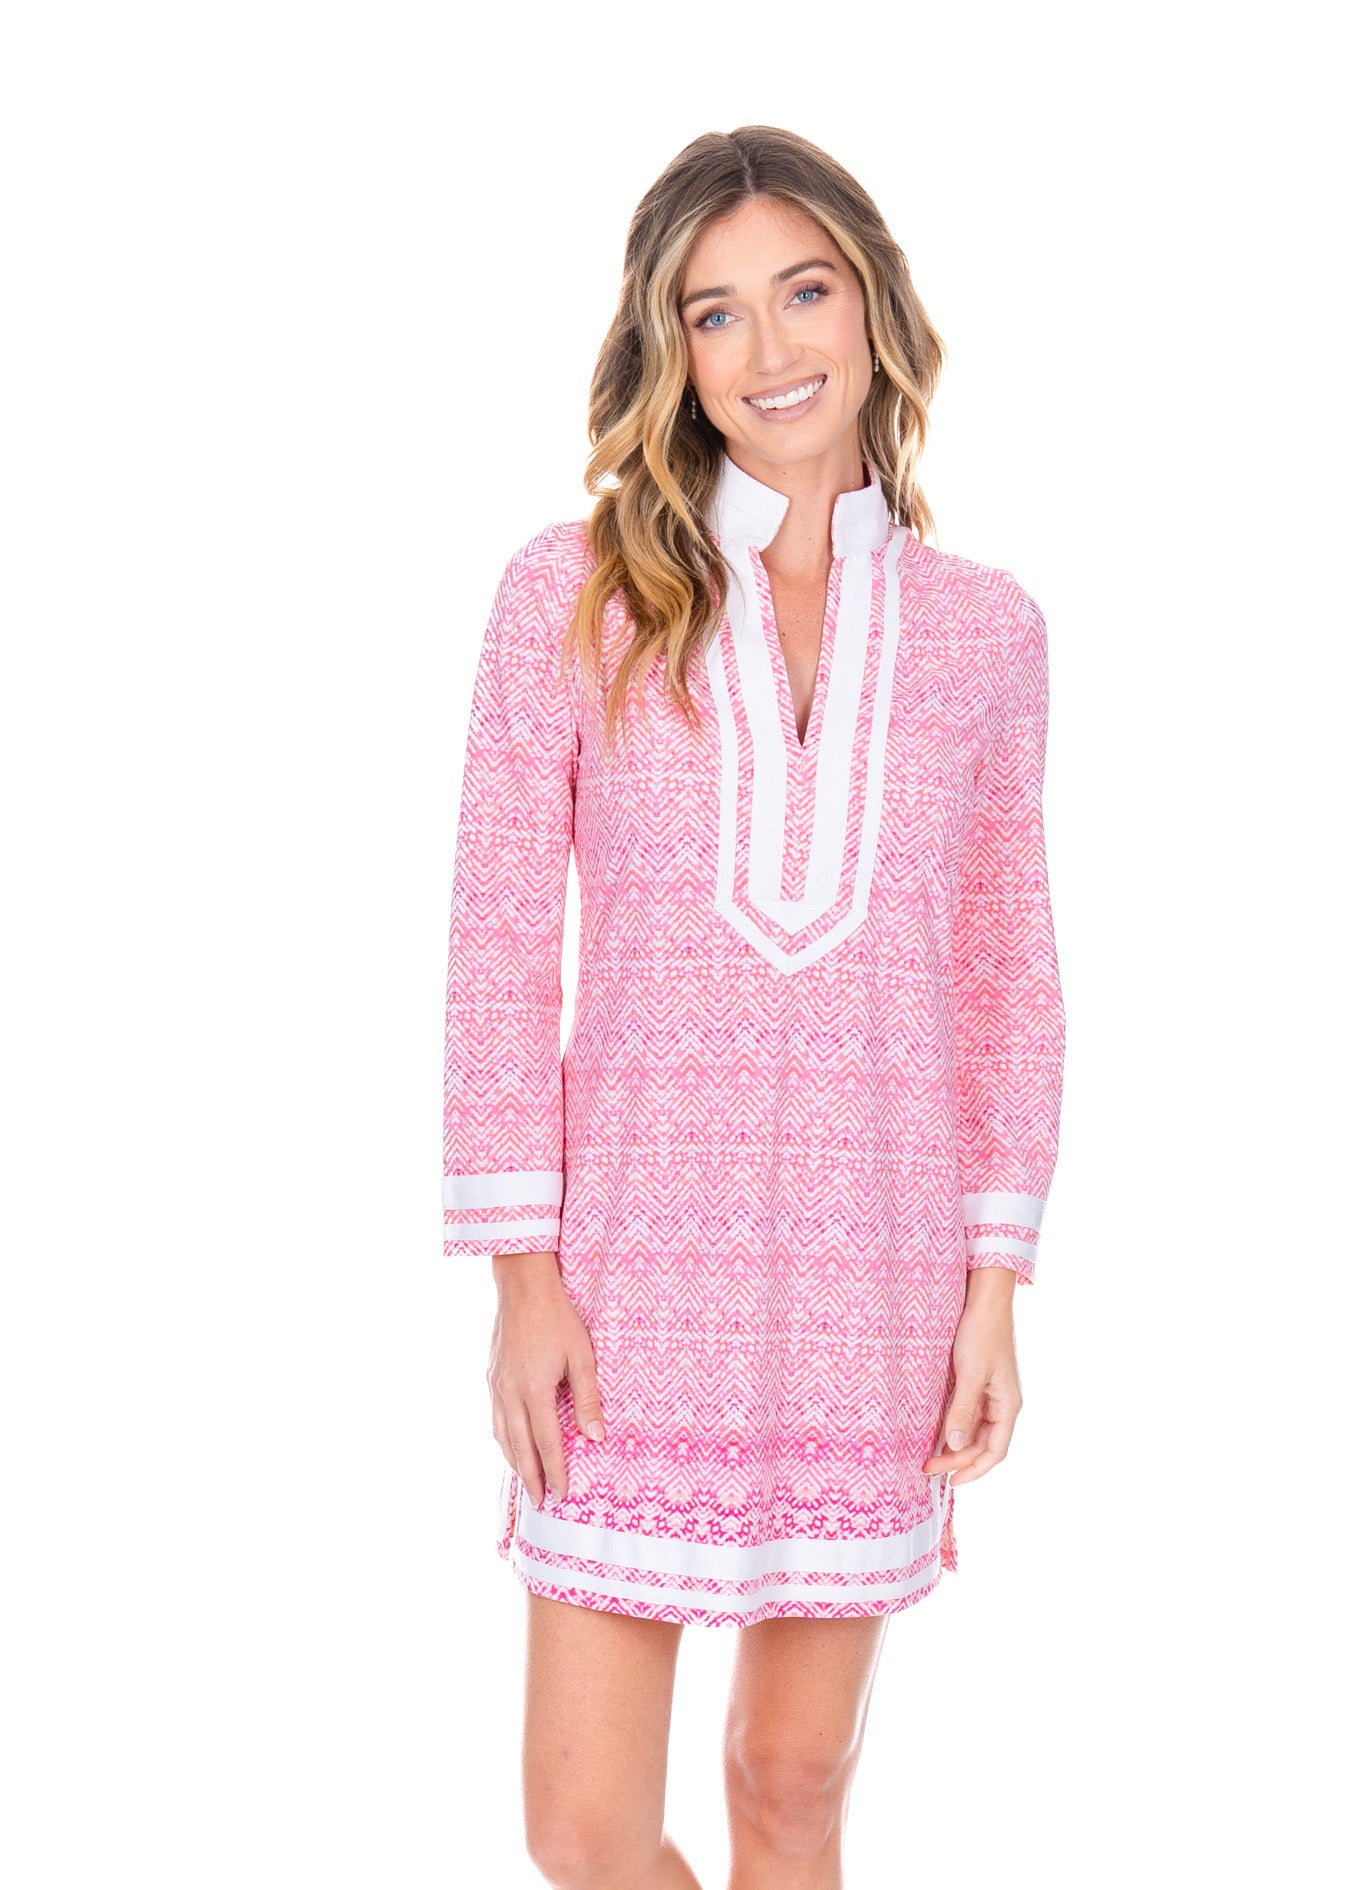 Blonde model wearing the Algarve Tunic Dress while facing the front.